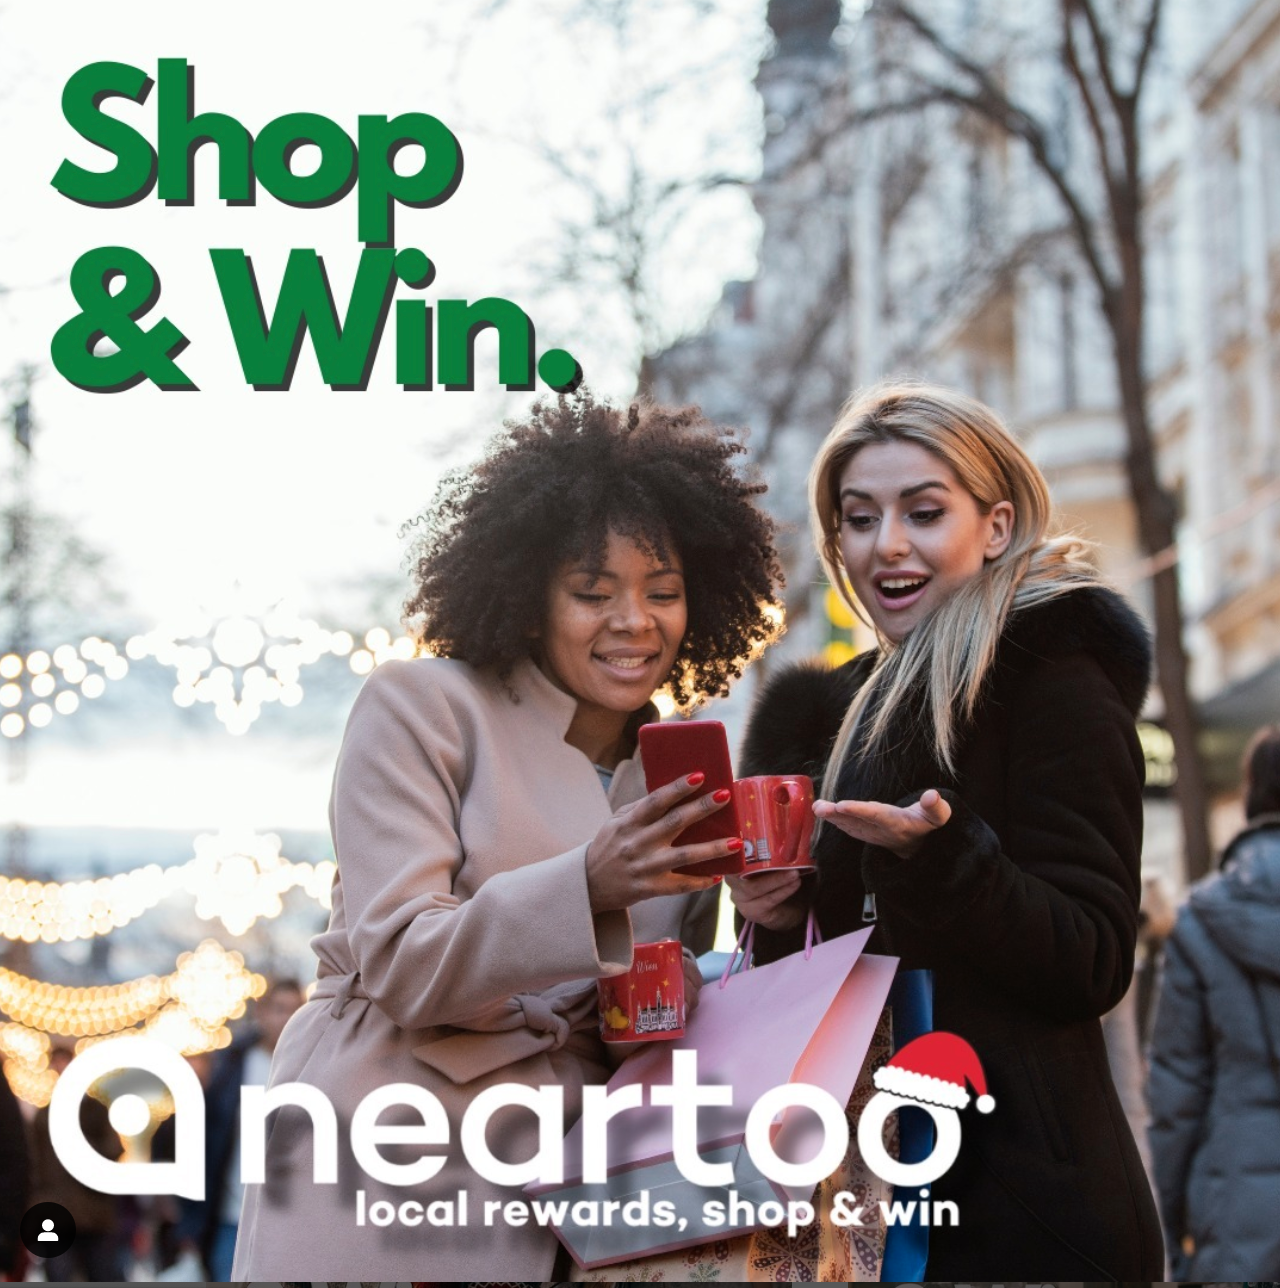 Above: The technology of Neartoo allows for shoppers and participating retailers to instigate promotions and incentives.